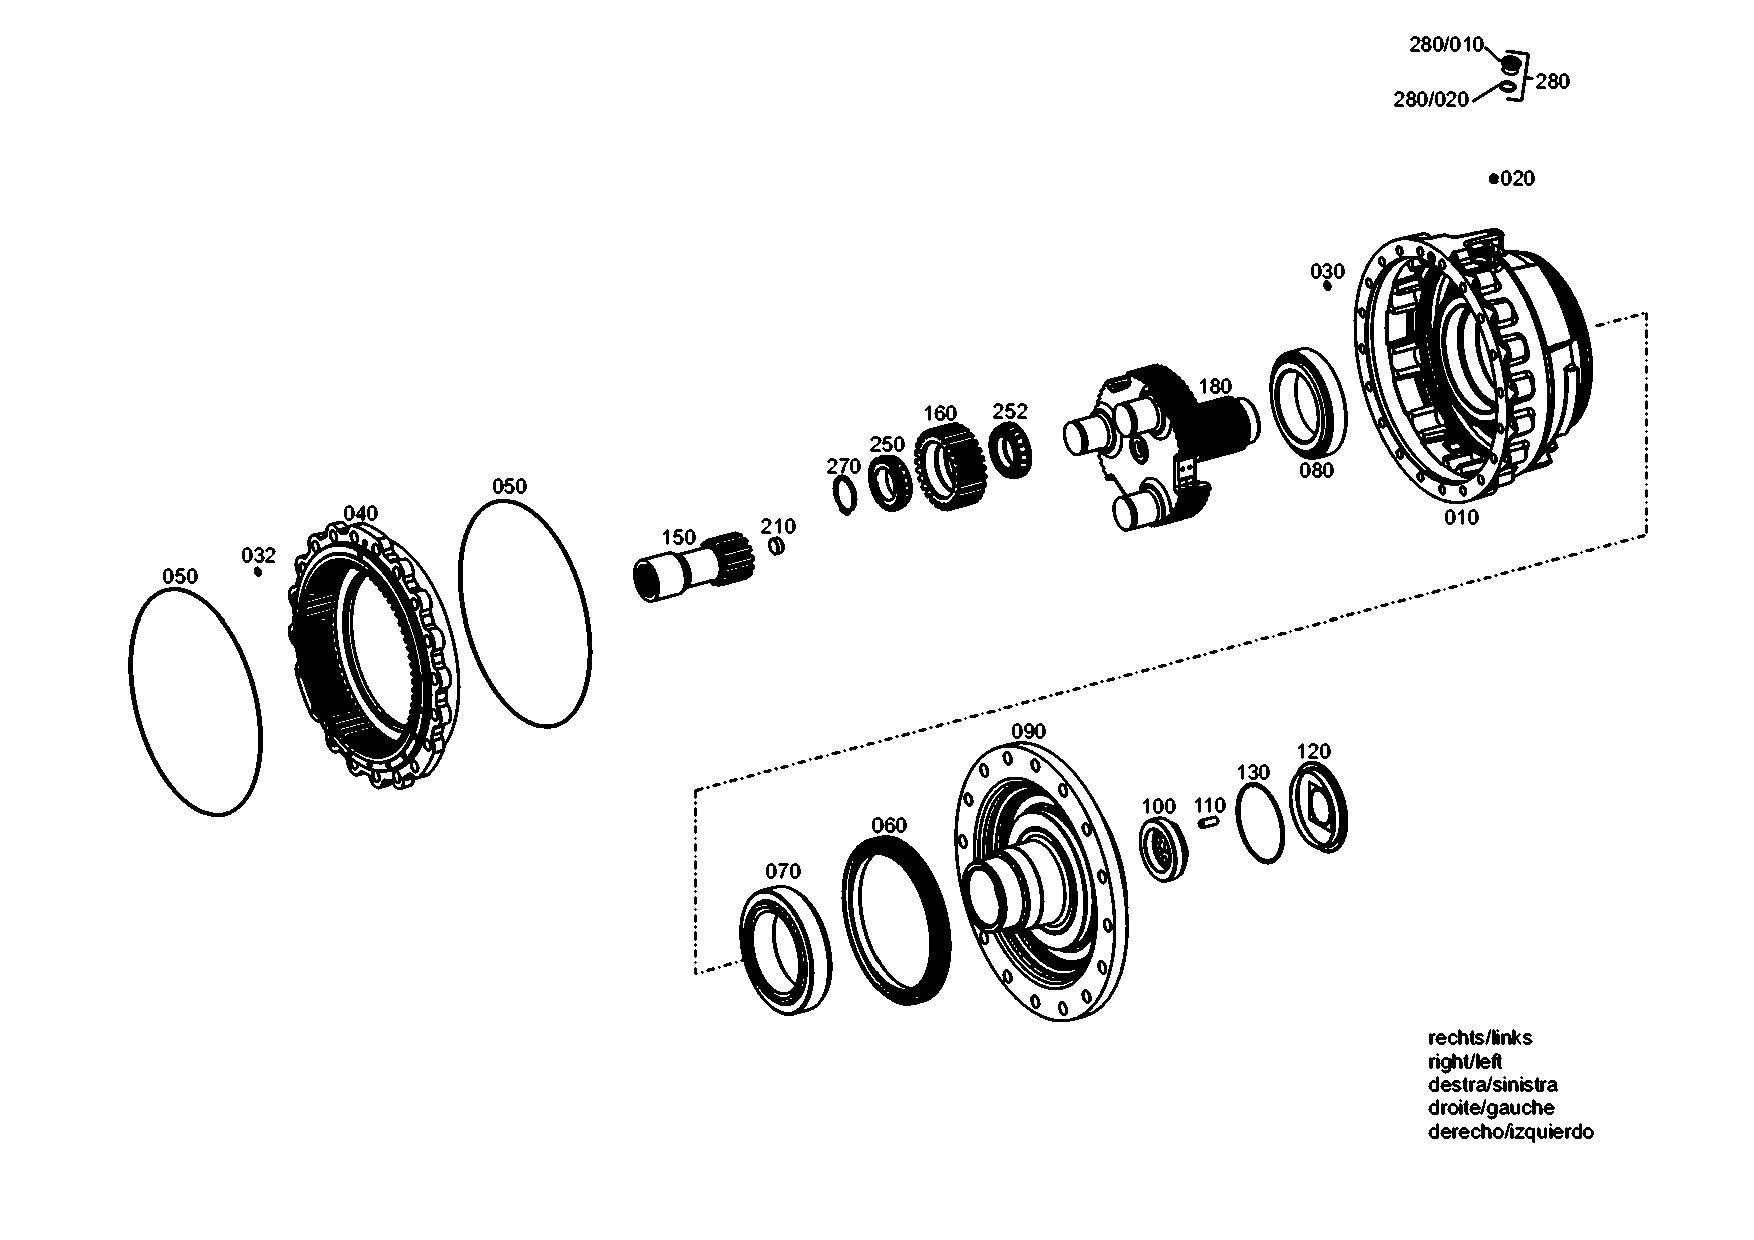 drawing for LIEBHERR GMBH 10032813 - OUTPUT SHAFT (figure 2)